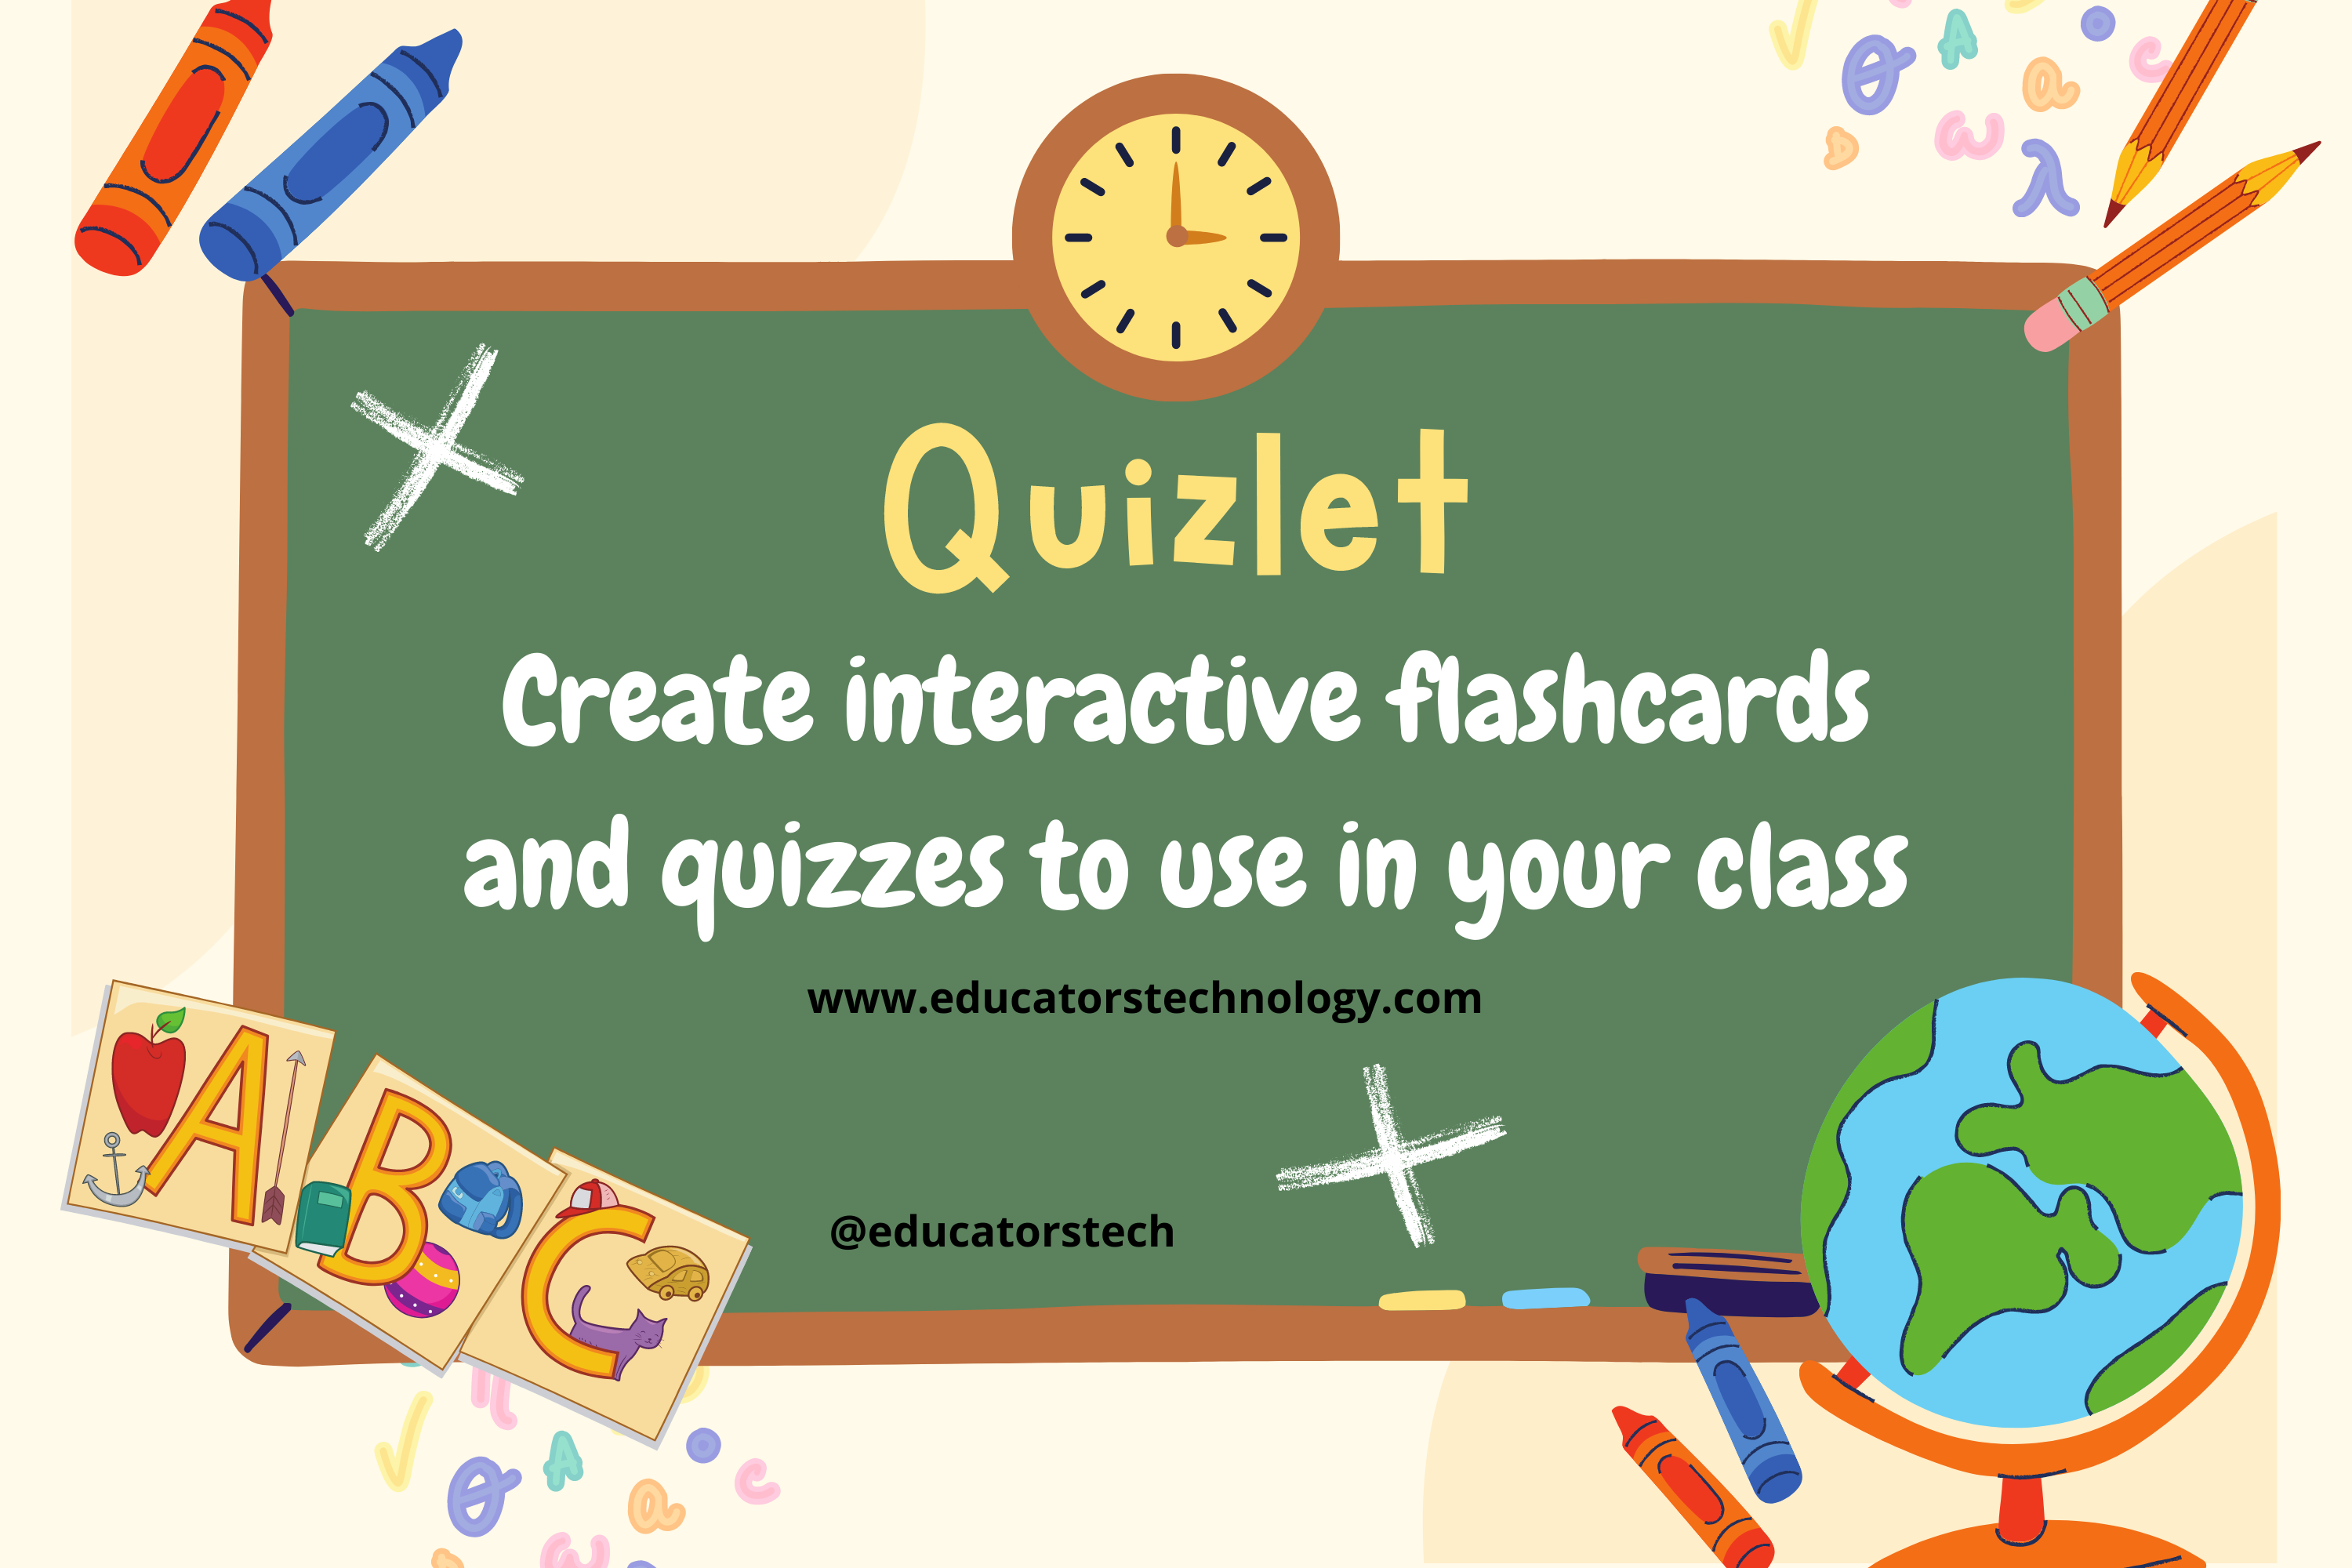 What is Quizlet and How to Use it to Create Interactive Flashcards and Quizzes?